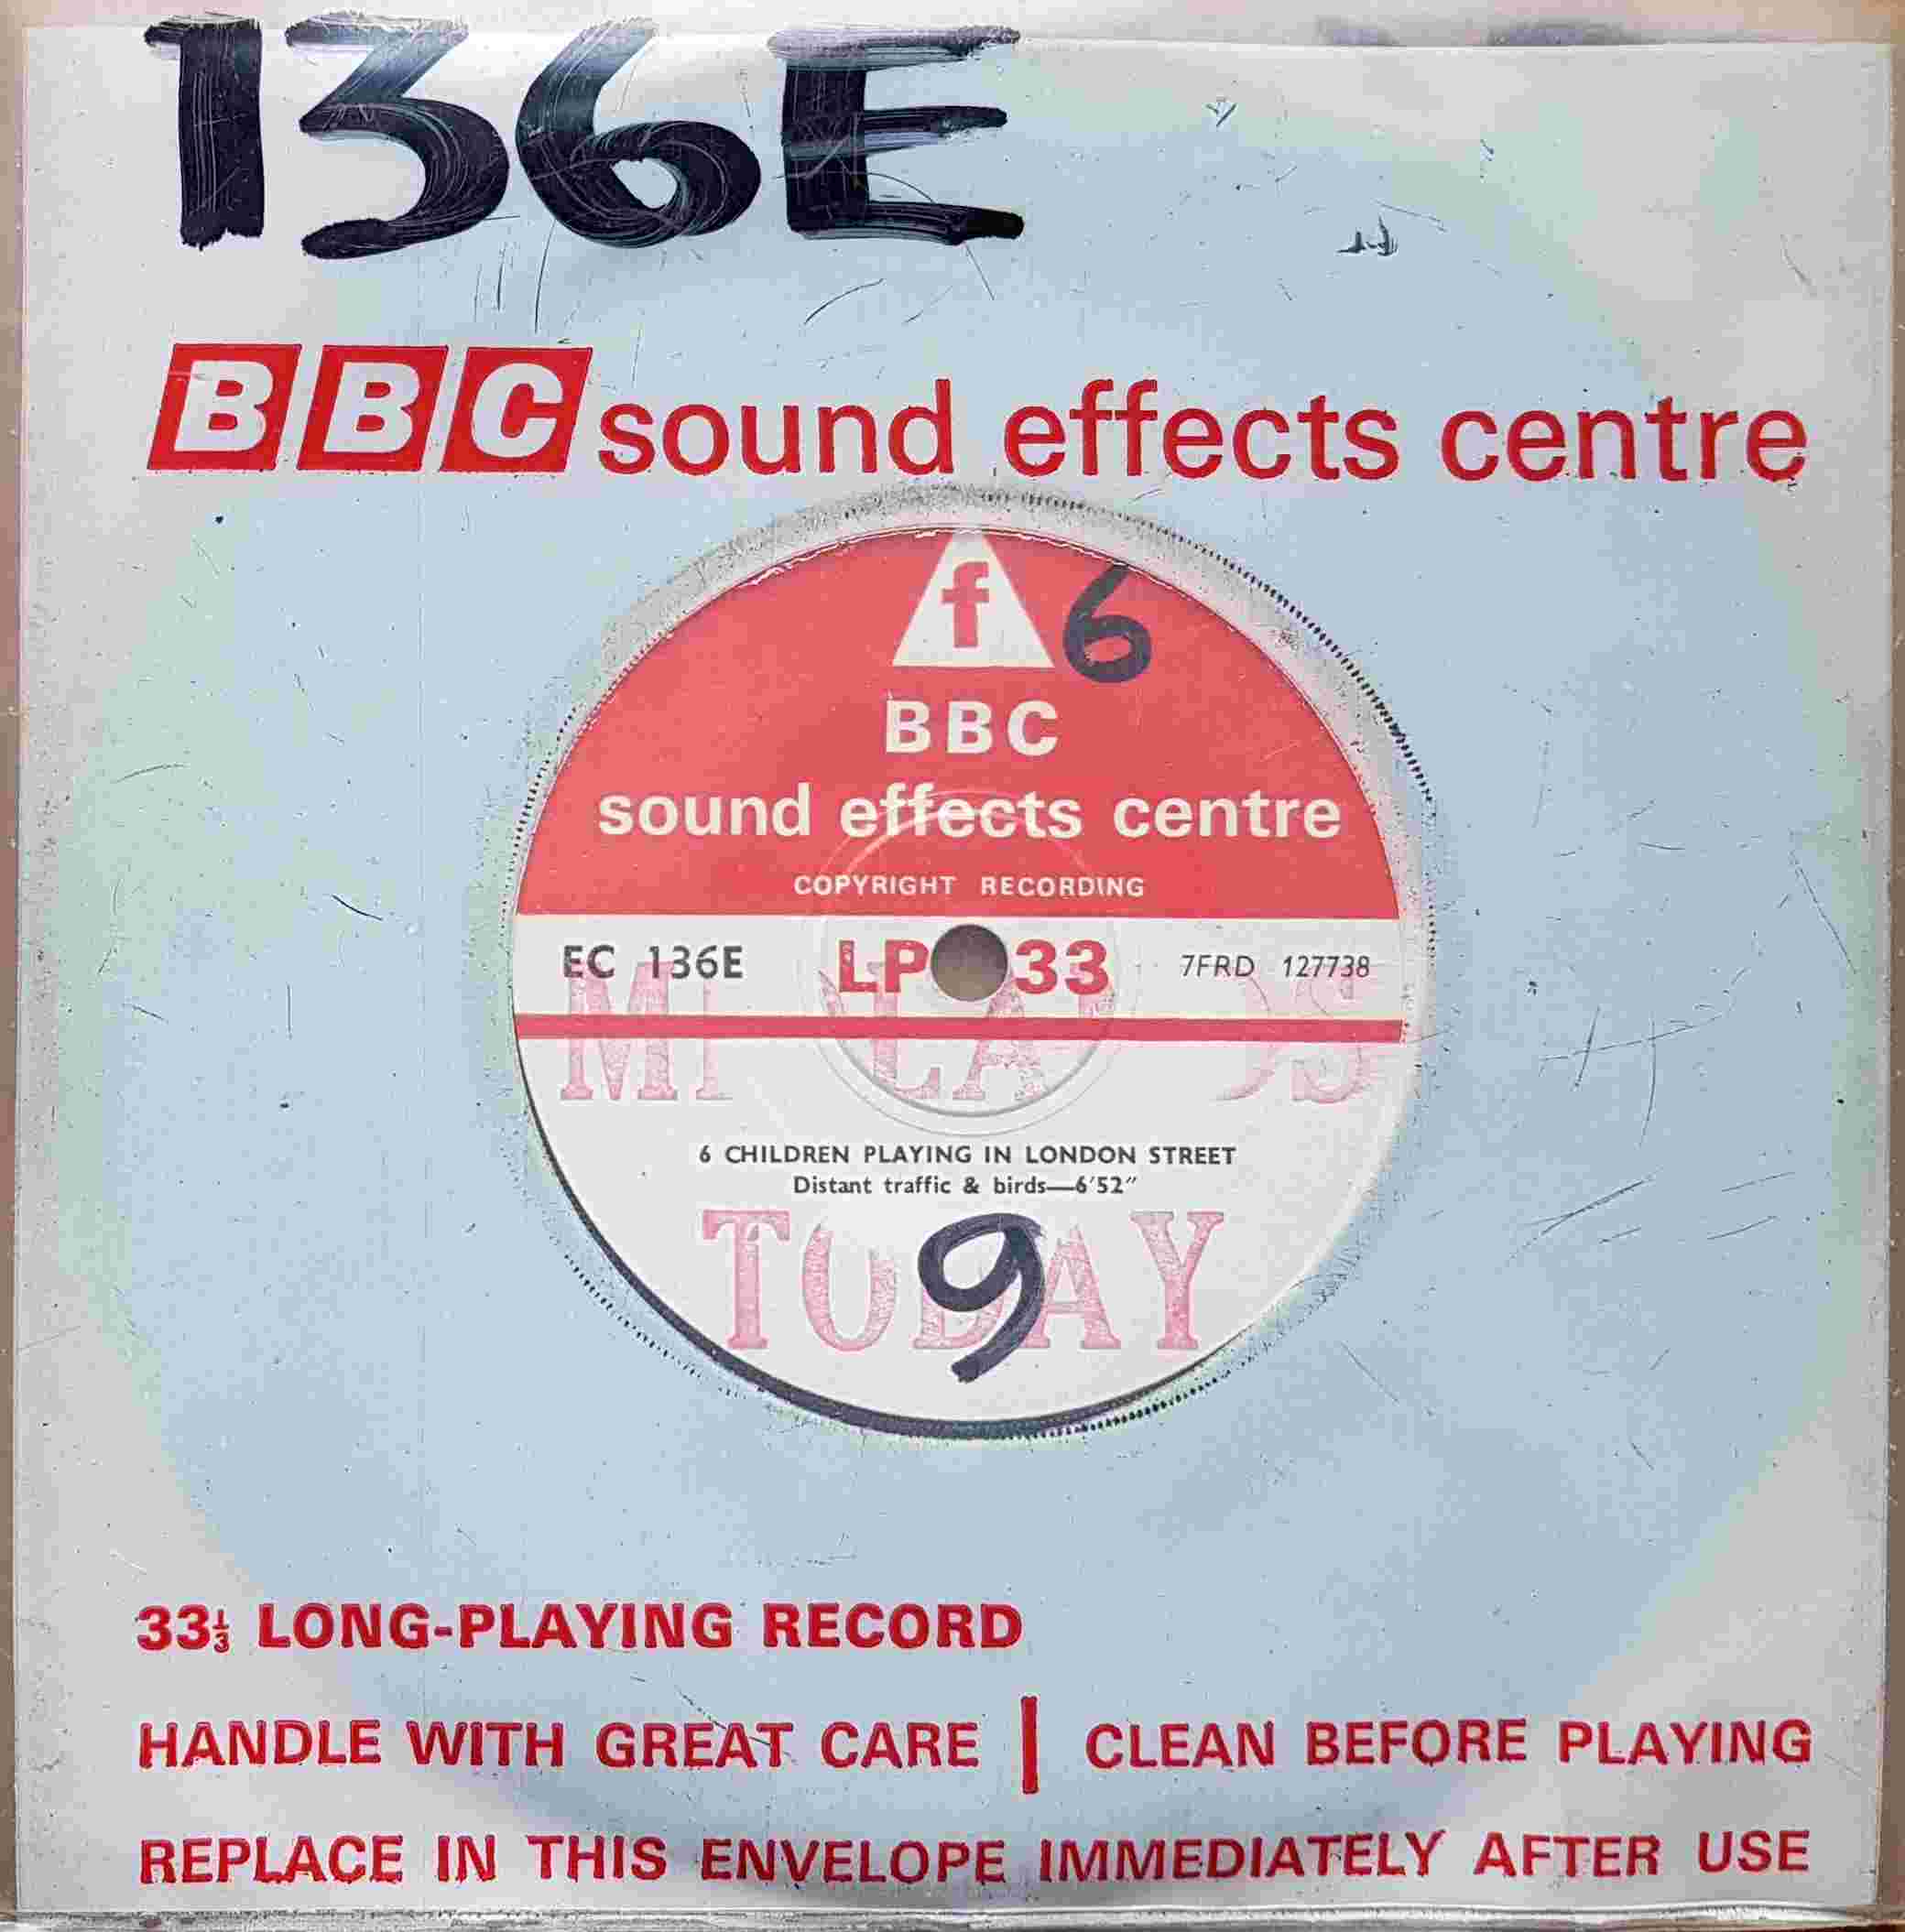 Picture of EC 136E 6 children in London street / 30 children in field by artist Not registered from the BBC singles - Records and Tapes library